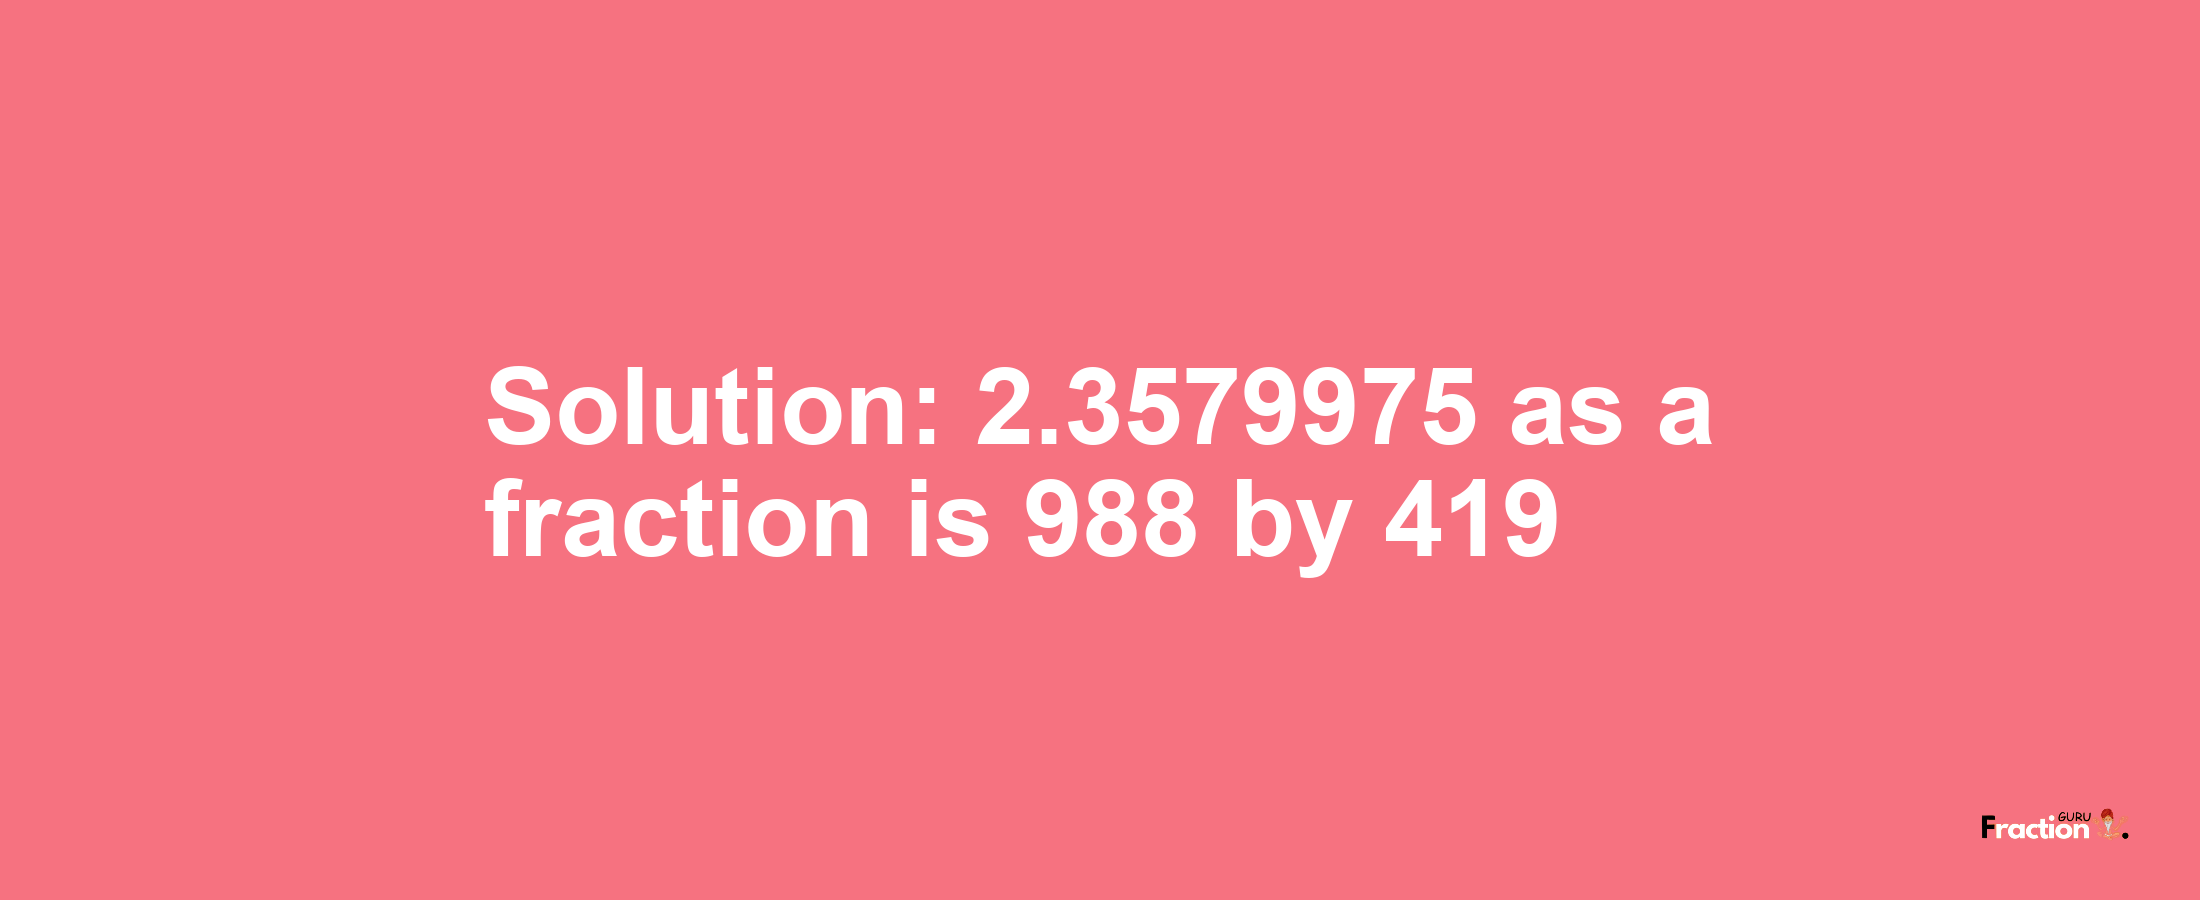 Solution:2.3579975 as a fraction is 988/419